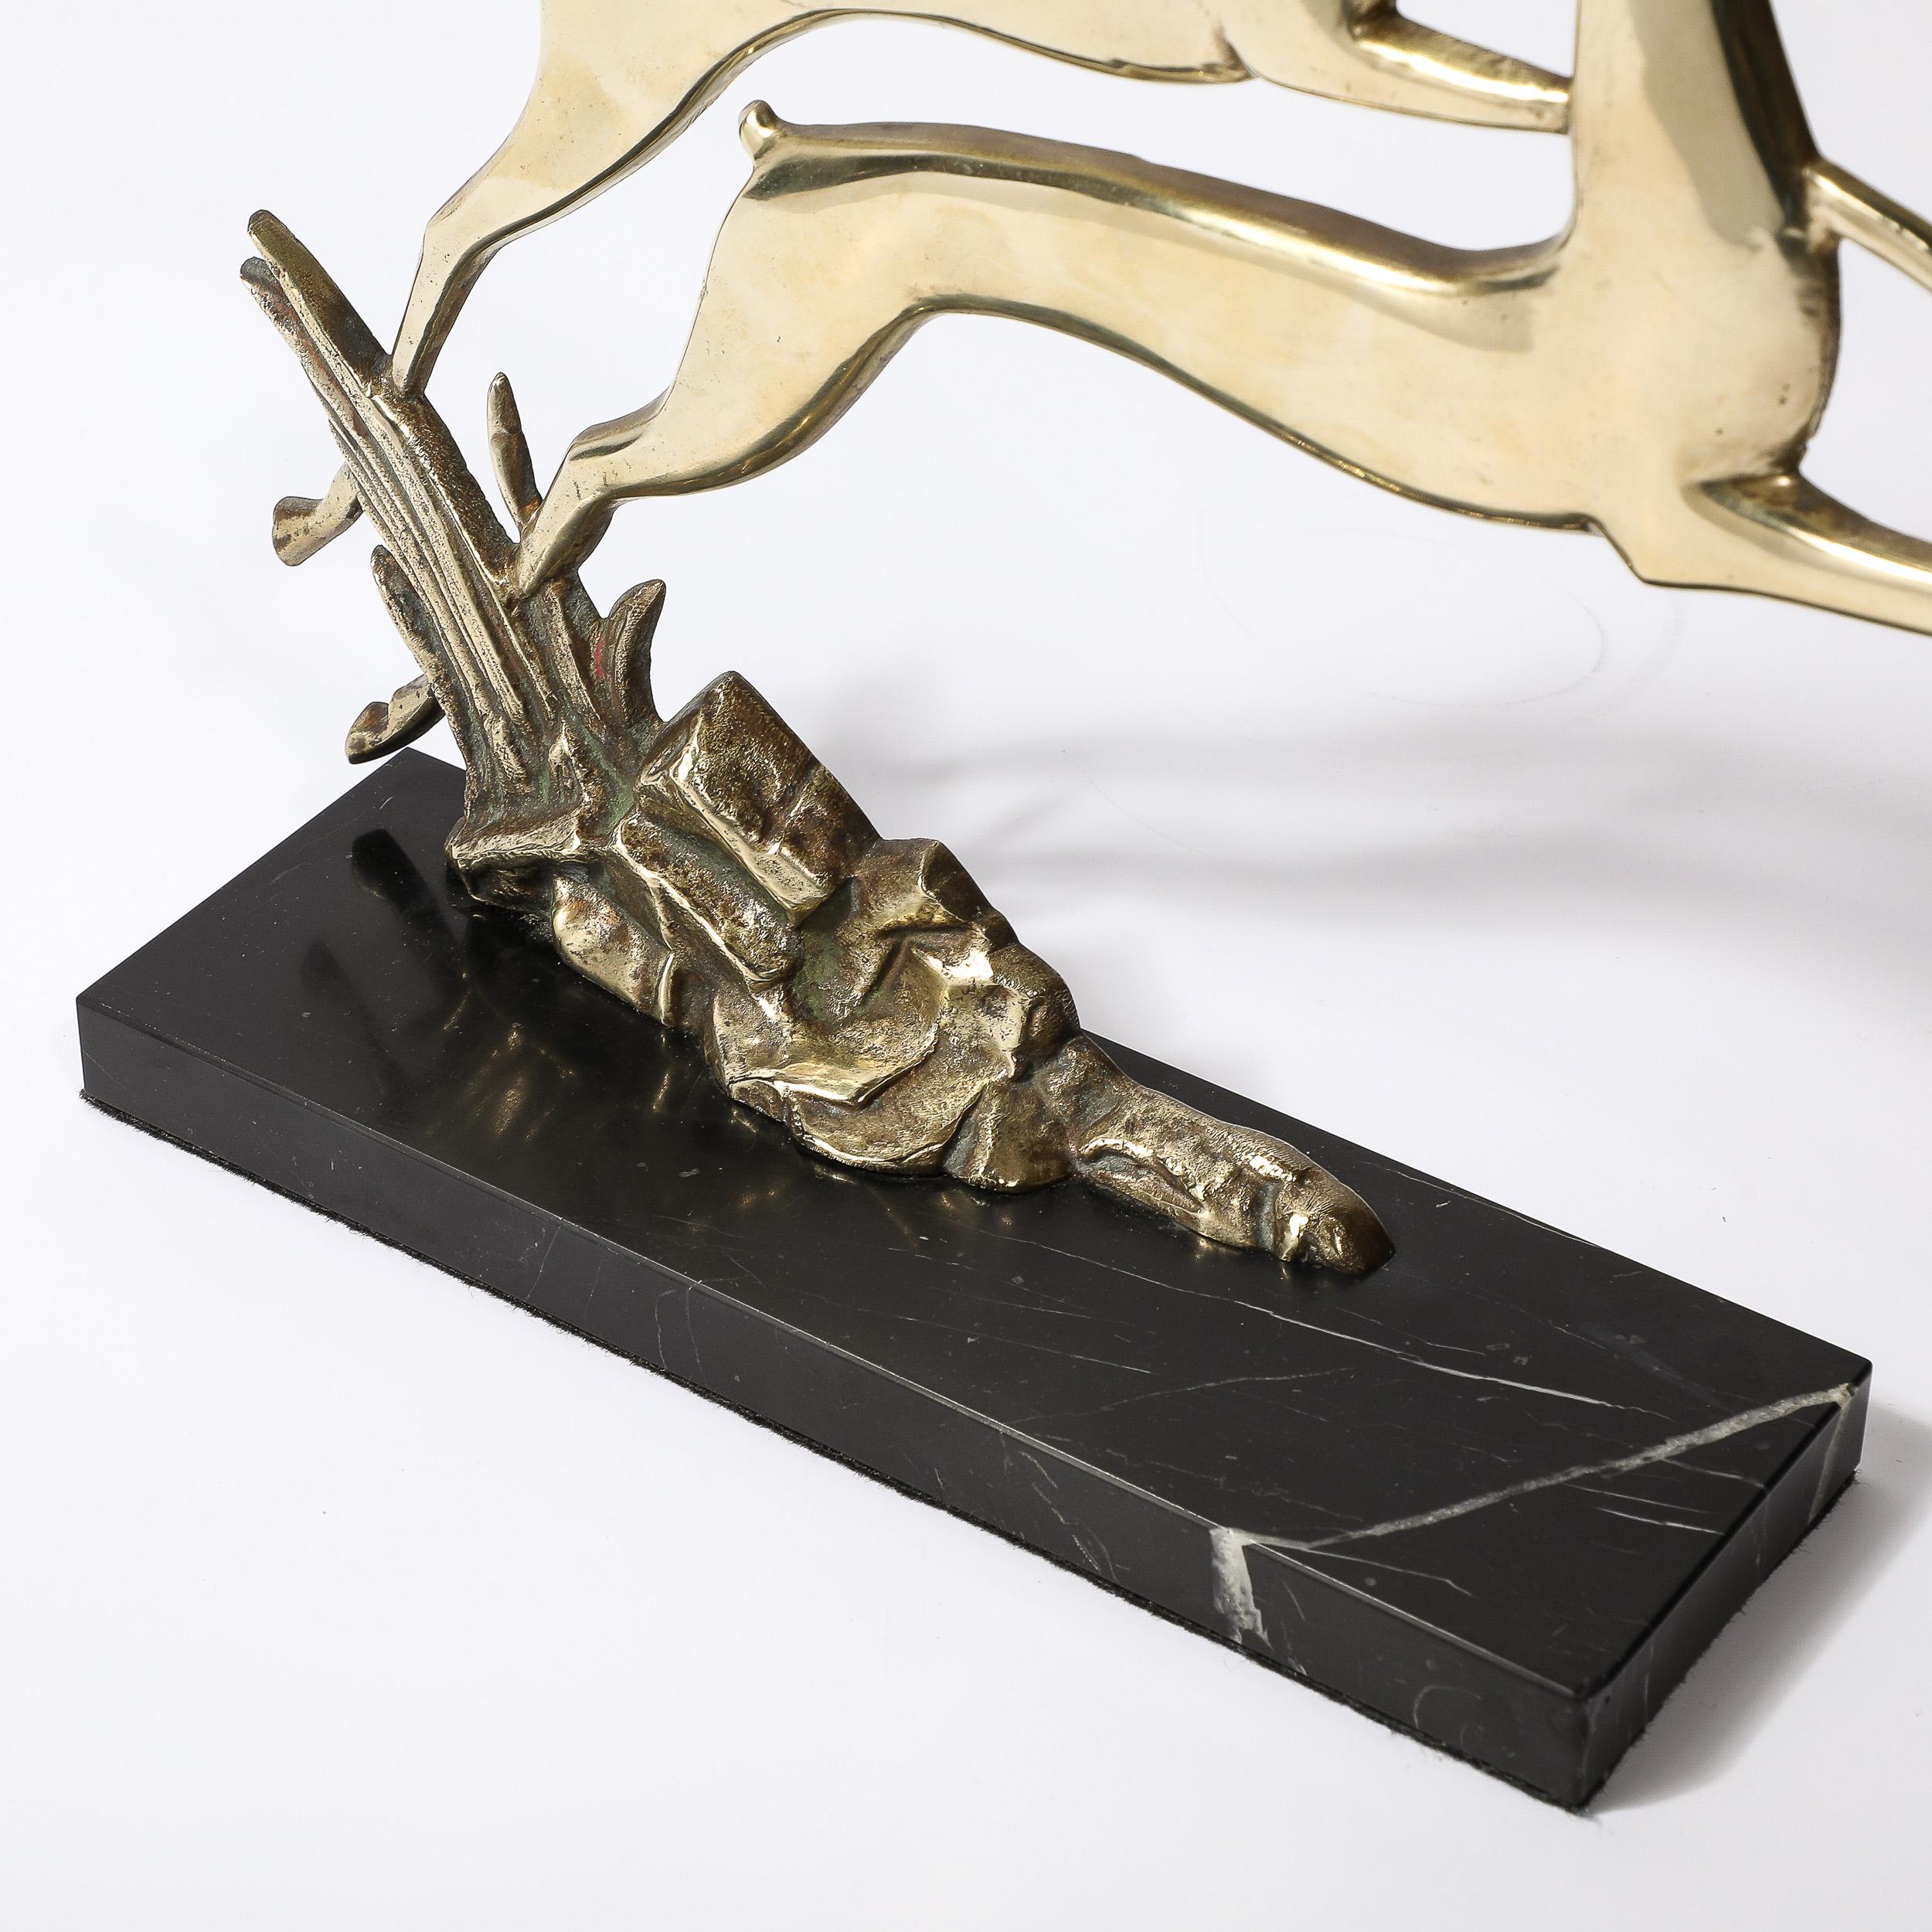 Mid-20th Century Art Deco Leaping Gazelle Sculpture in Polished Brass on Black Marble Base For Sale